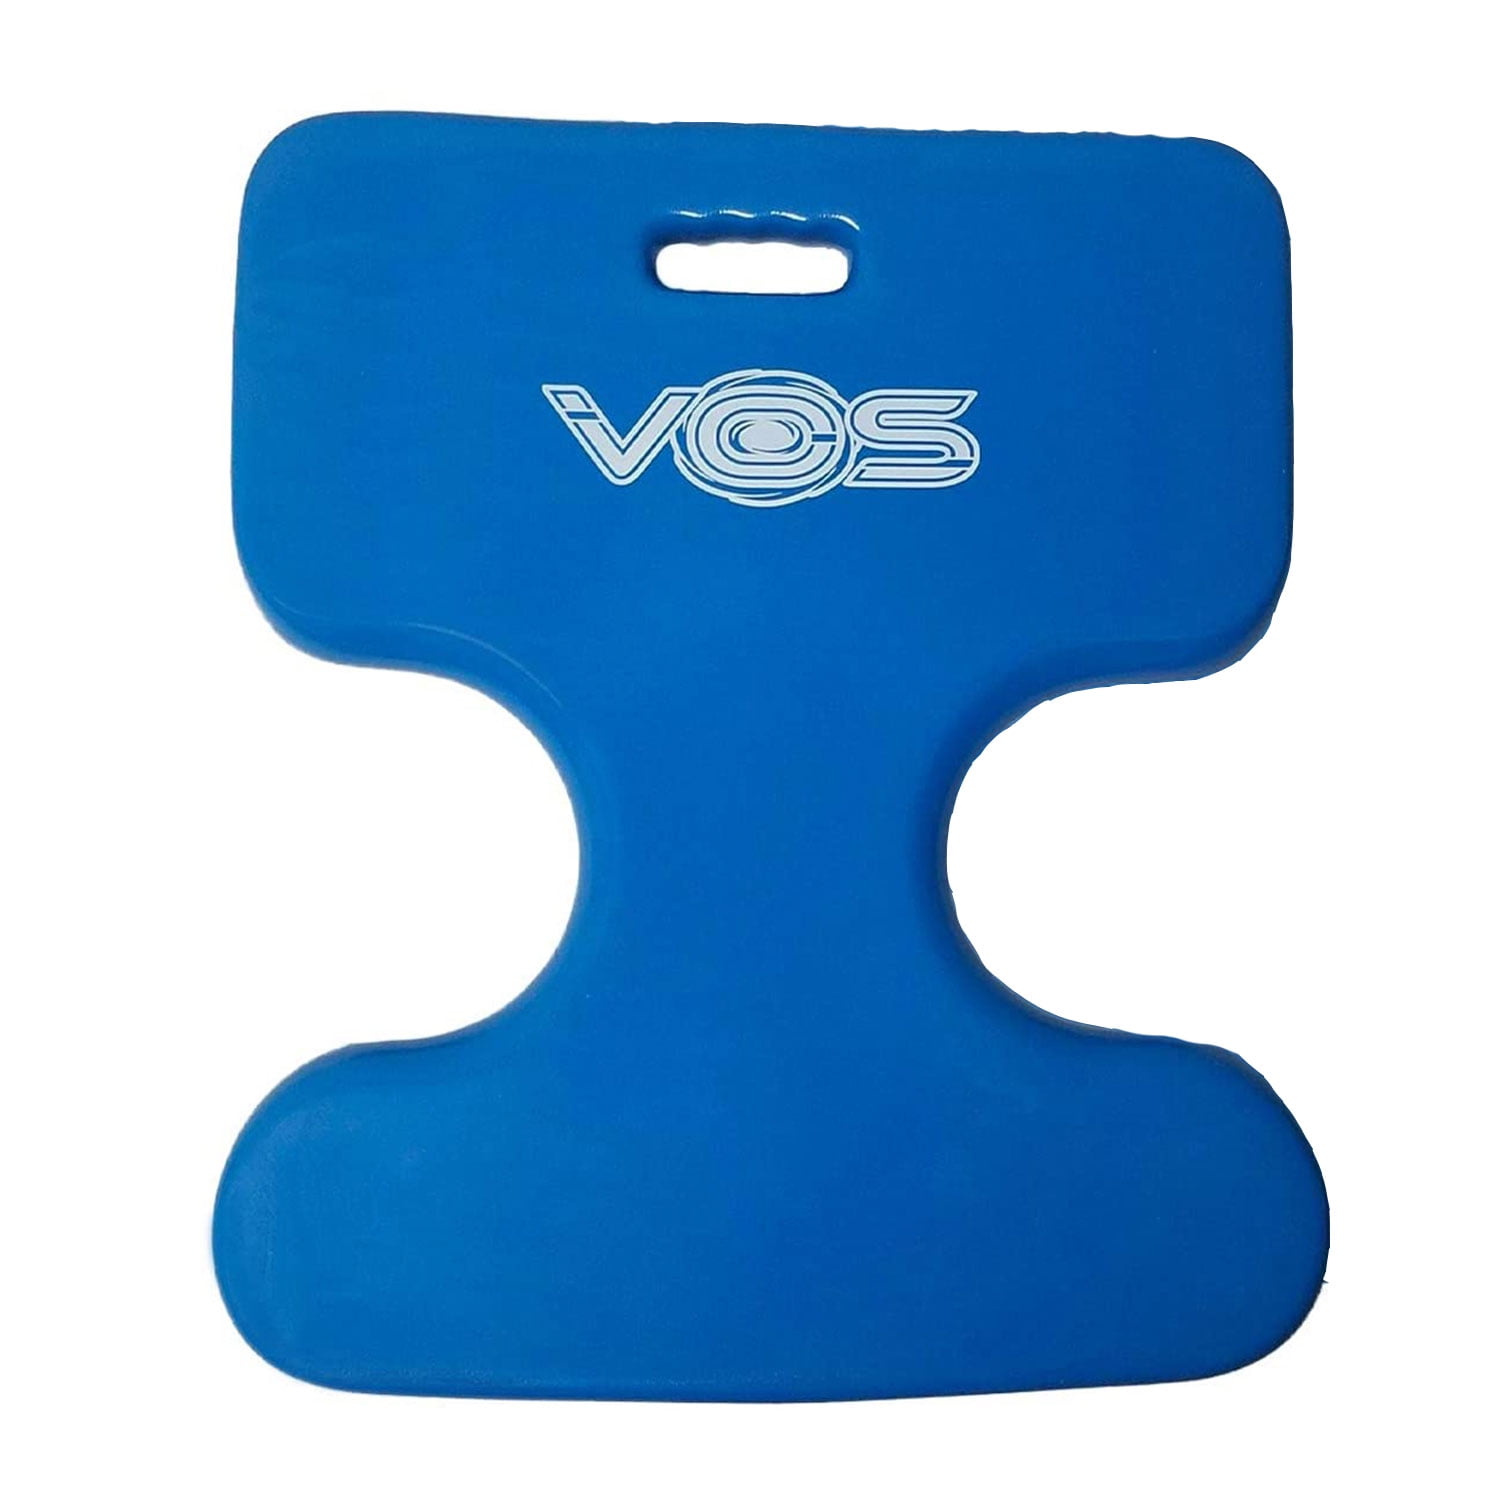 Vos Oasis Water Saddle Floats for Adults and Kids Water Parks Lakes 6, Barrier Blue Beaches Ultra Buoyant Double Coated Floating Seats for Pool 